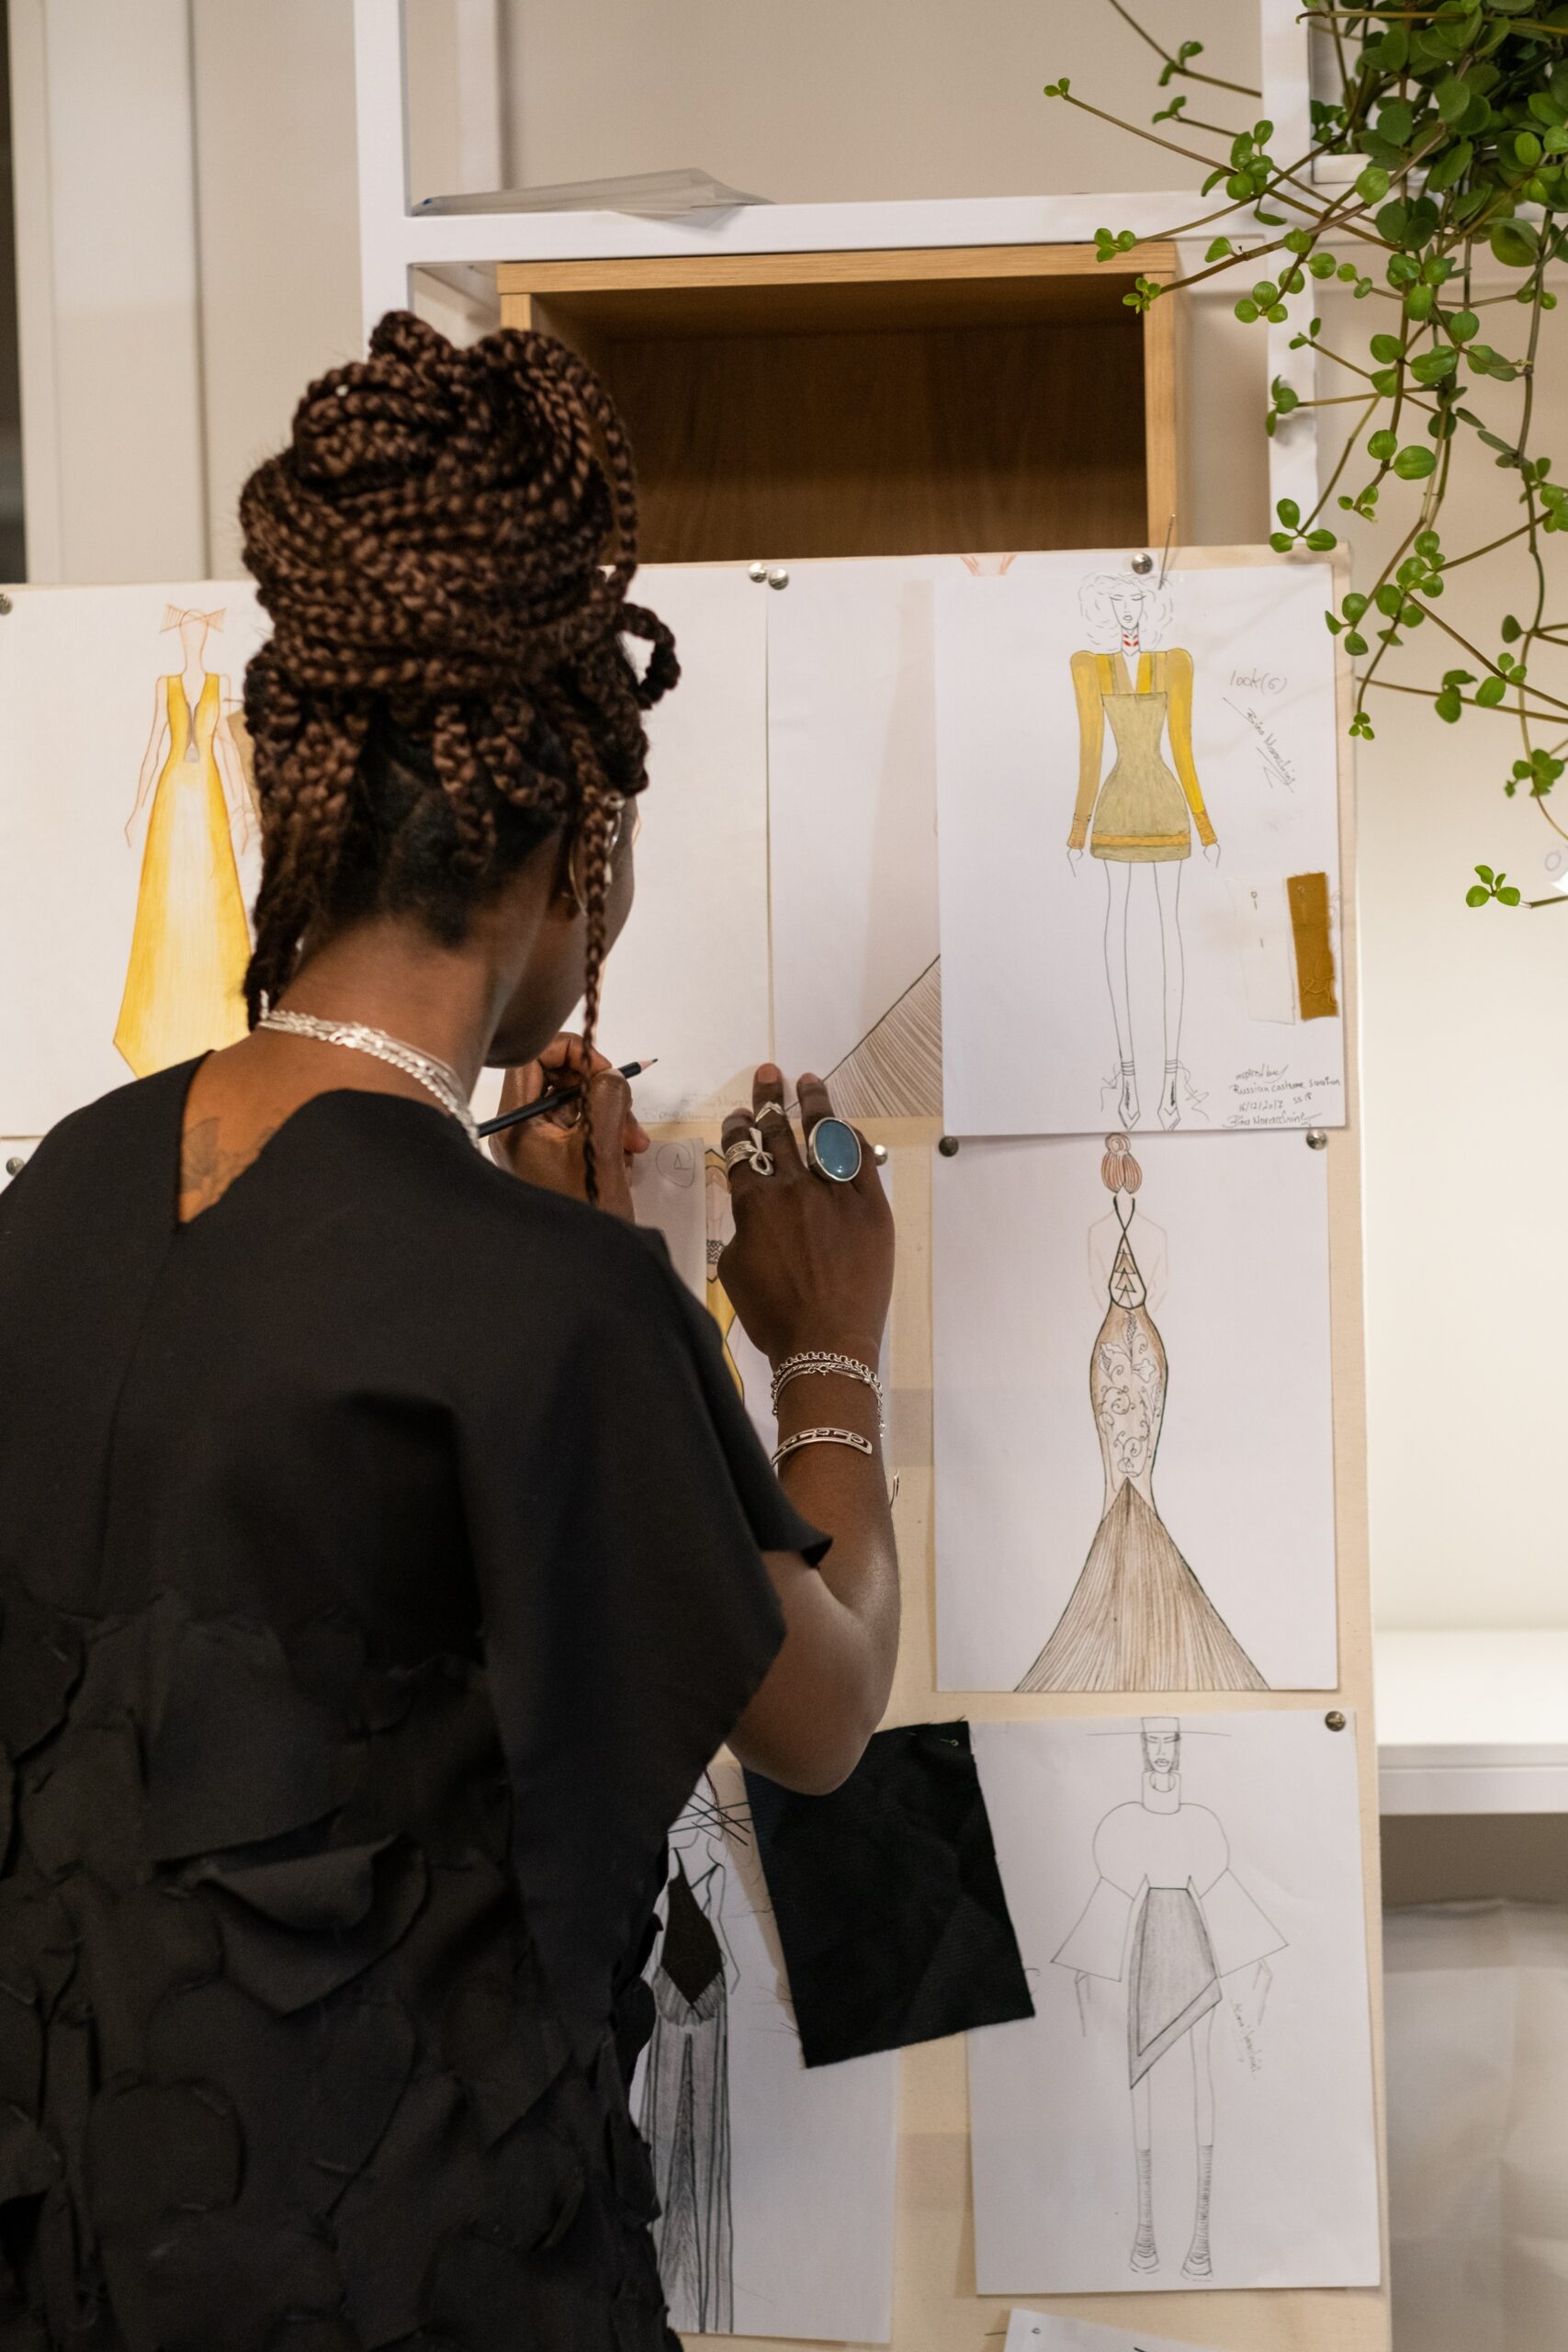 Nympha Nzeribe: How to Thrive as an Emerging Fashion Designer